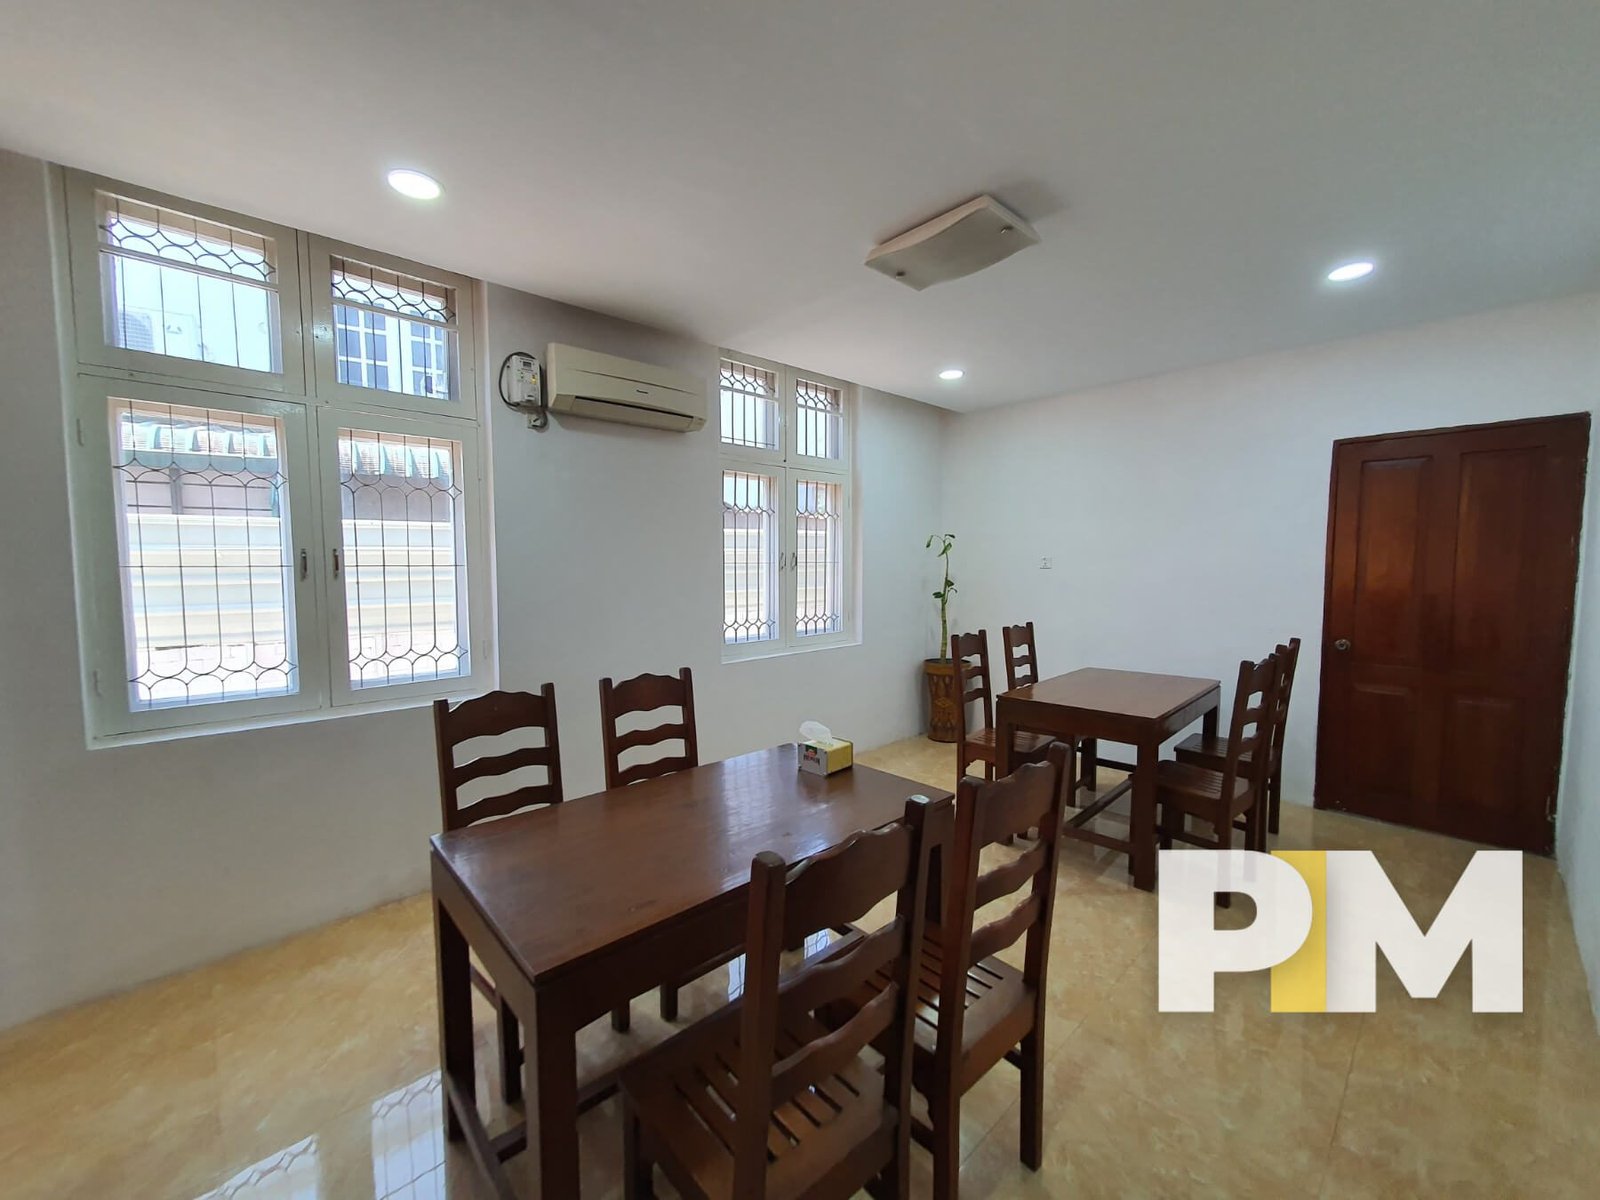 Dining table and chairs - Real Estate in Yangon